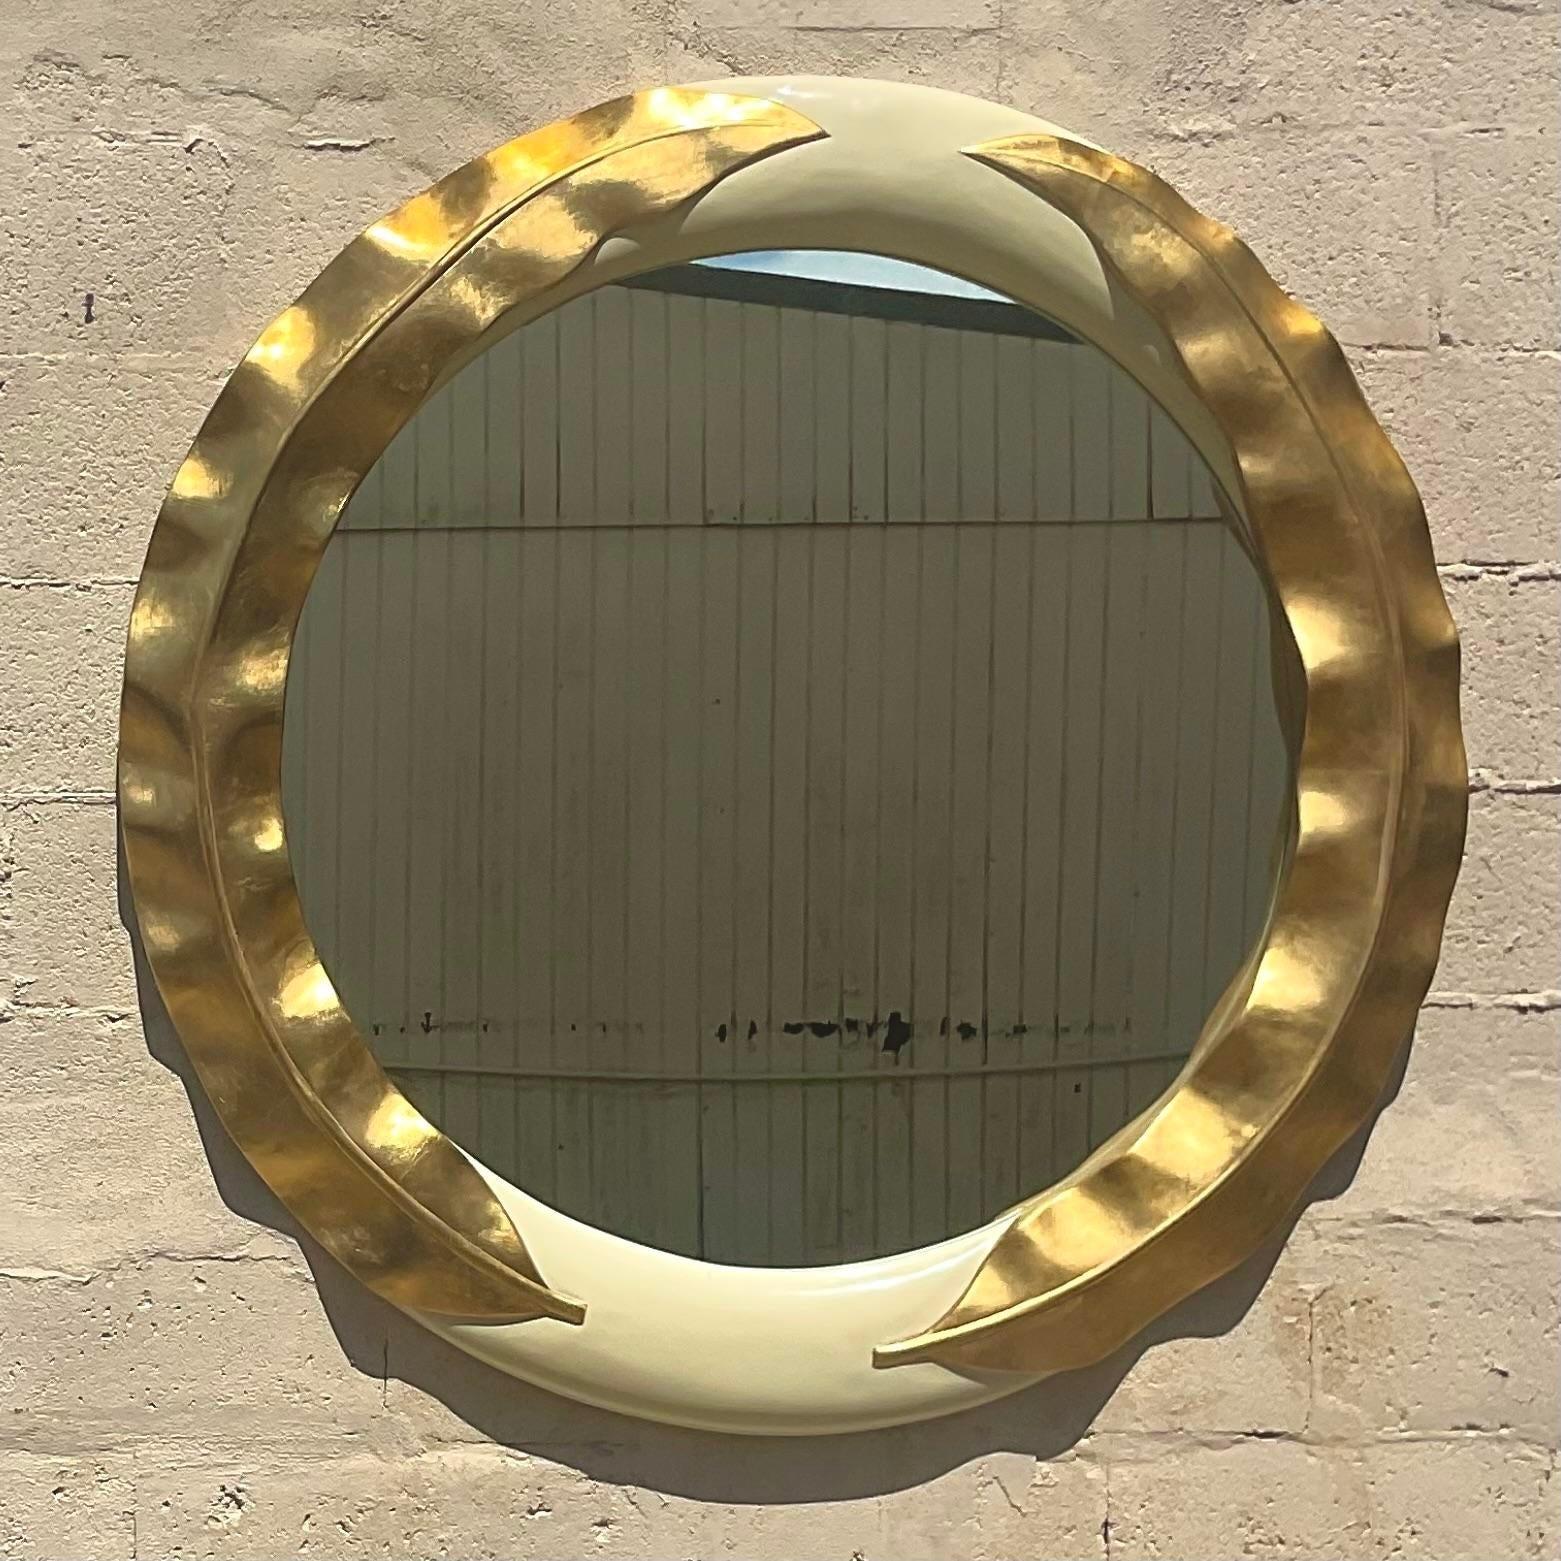 A stunning vintage Regency wall mirror. Monumental in size and drama. A chic gold leaf design on an ivory lacquered frame. Acquired from a Palm Beach estate.